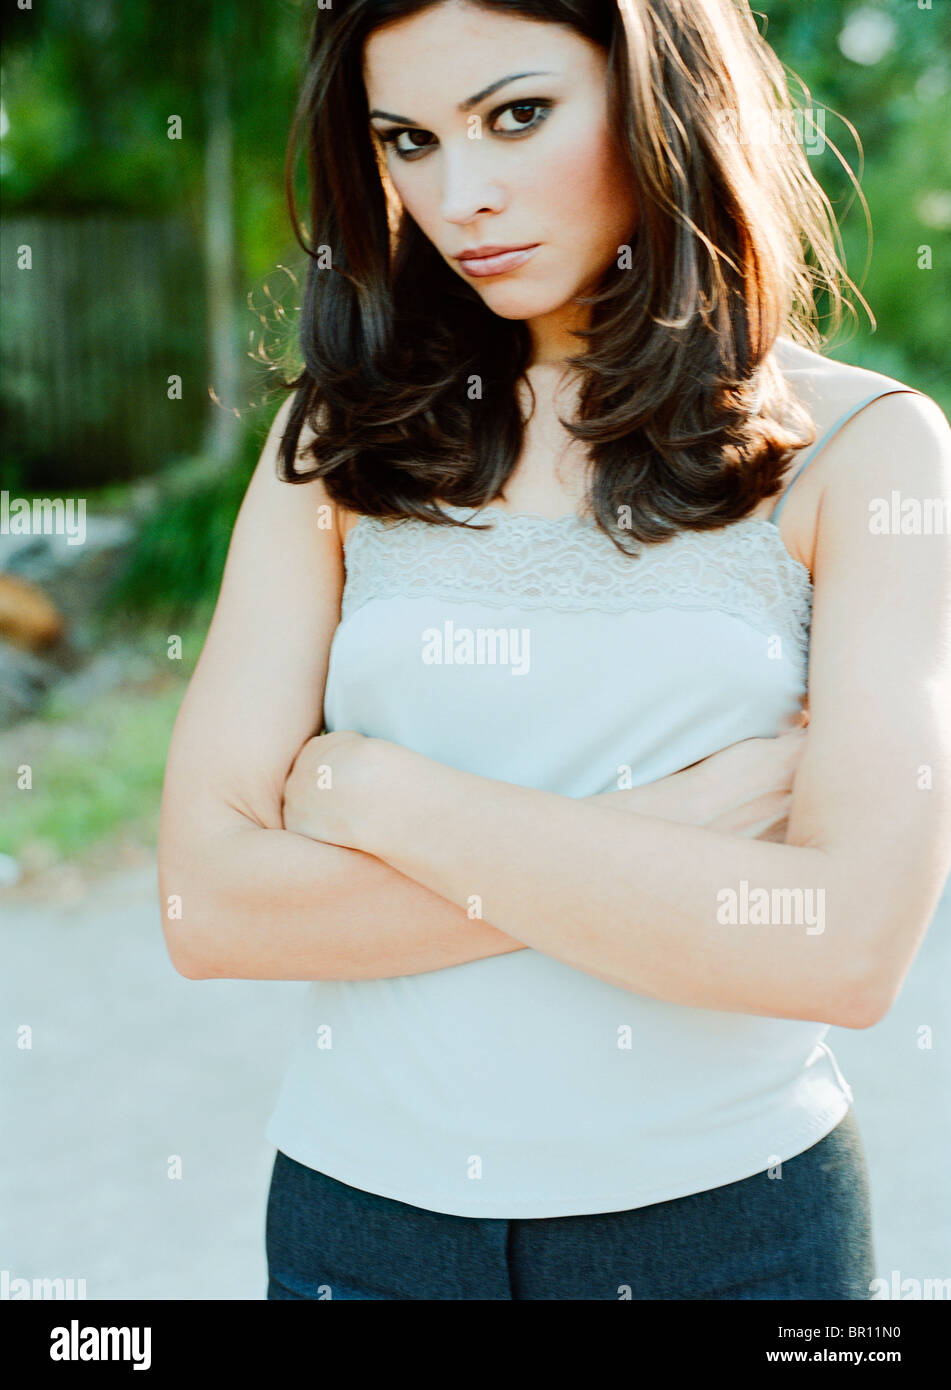 Woman standing with arms crossed Stock Photo